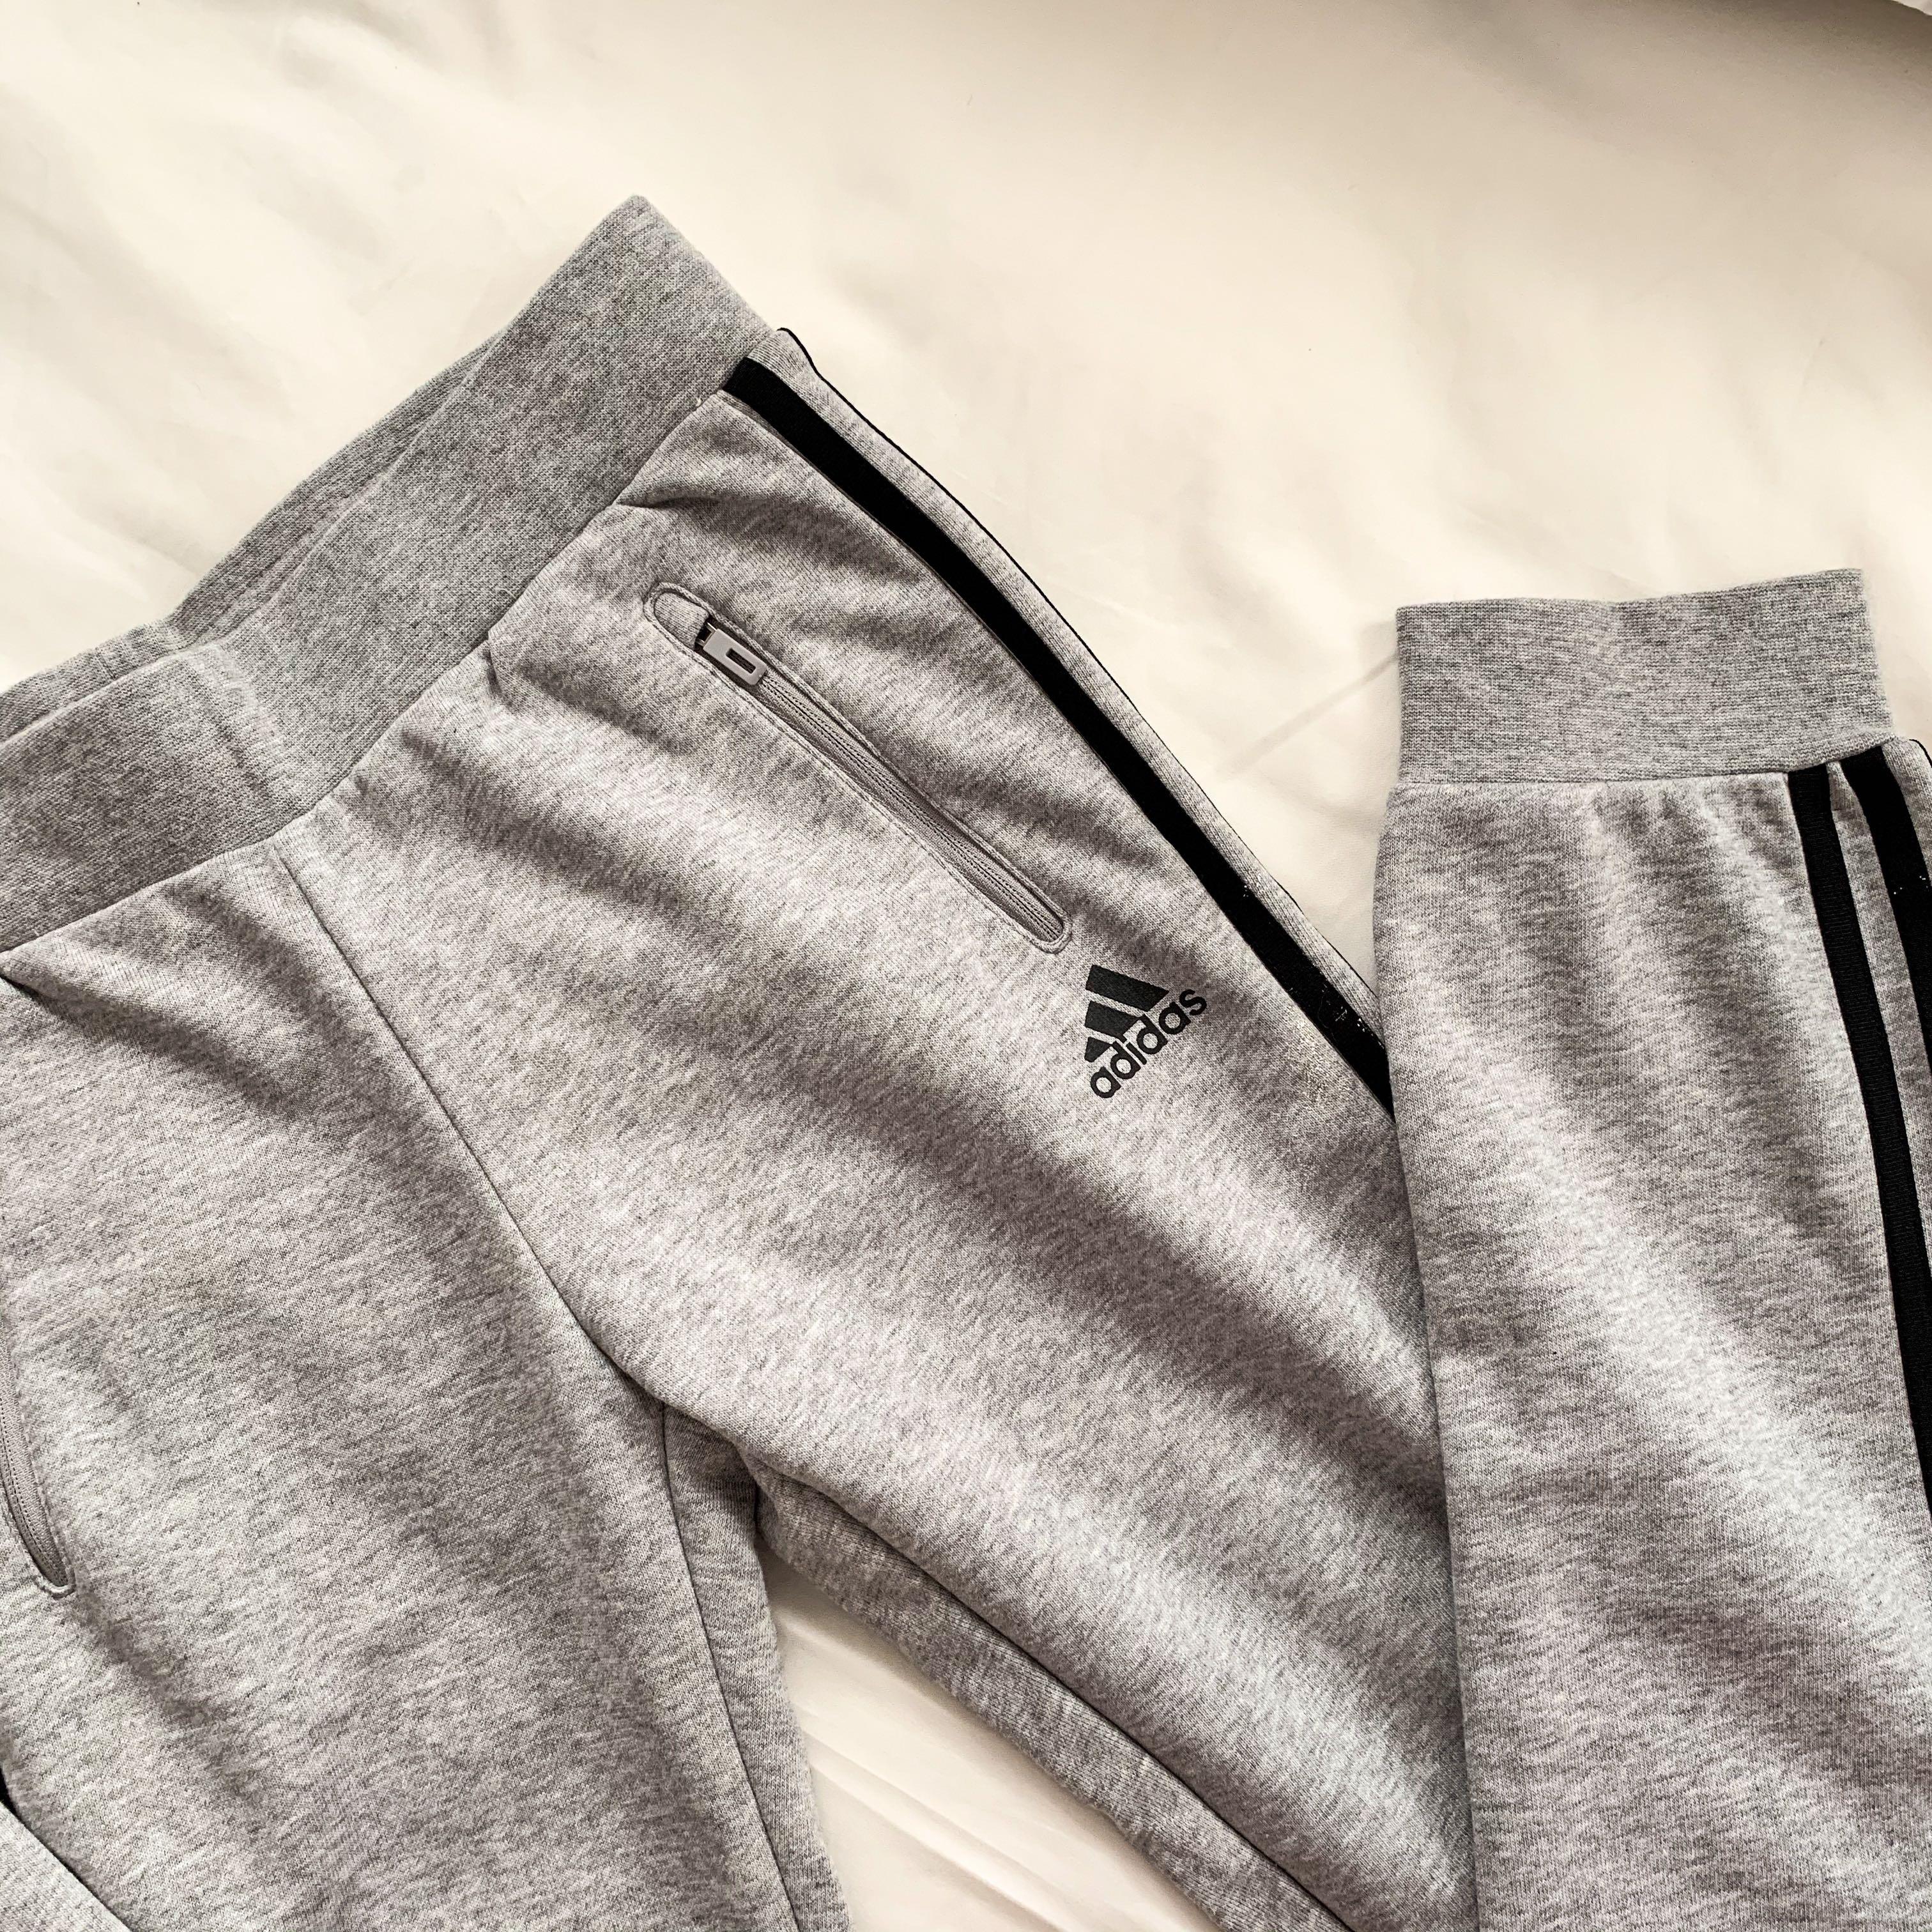 climalite joggers